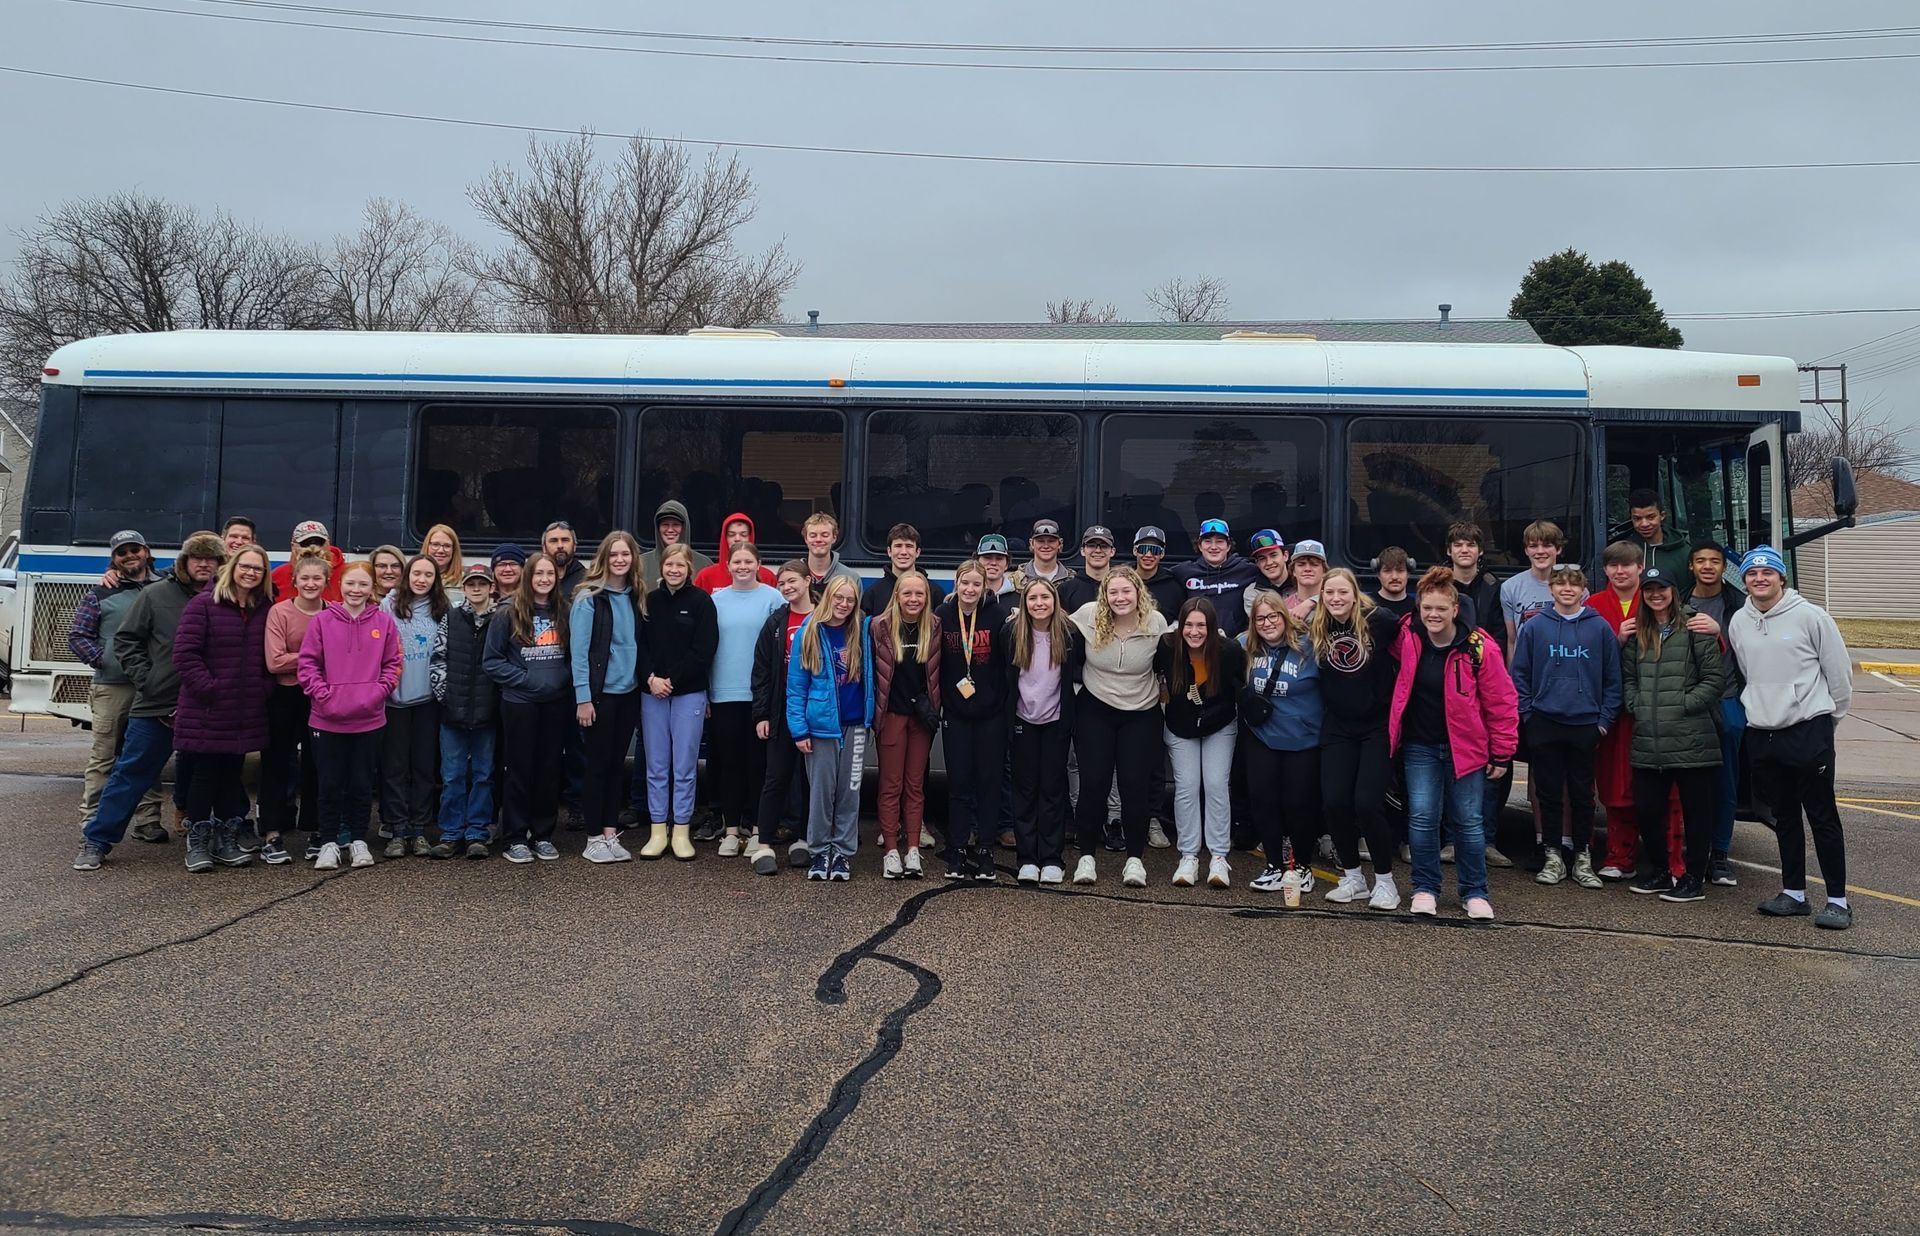 A group of people are posing for a picture in front of a bus heading to ski trip in Wyoming.